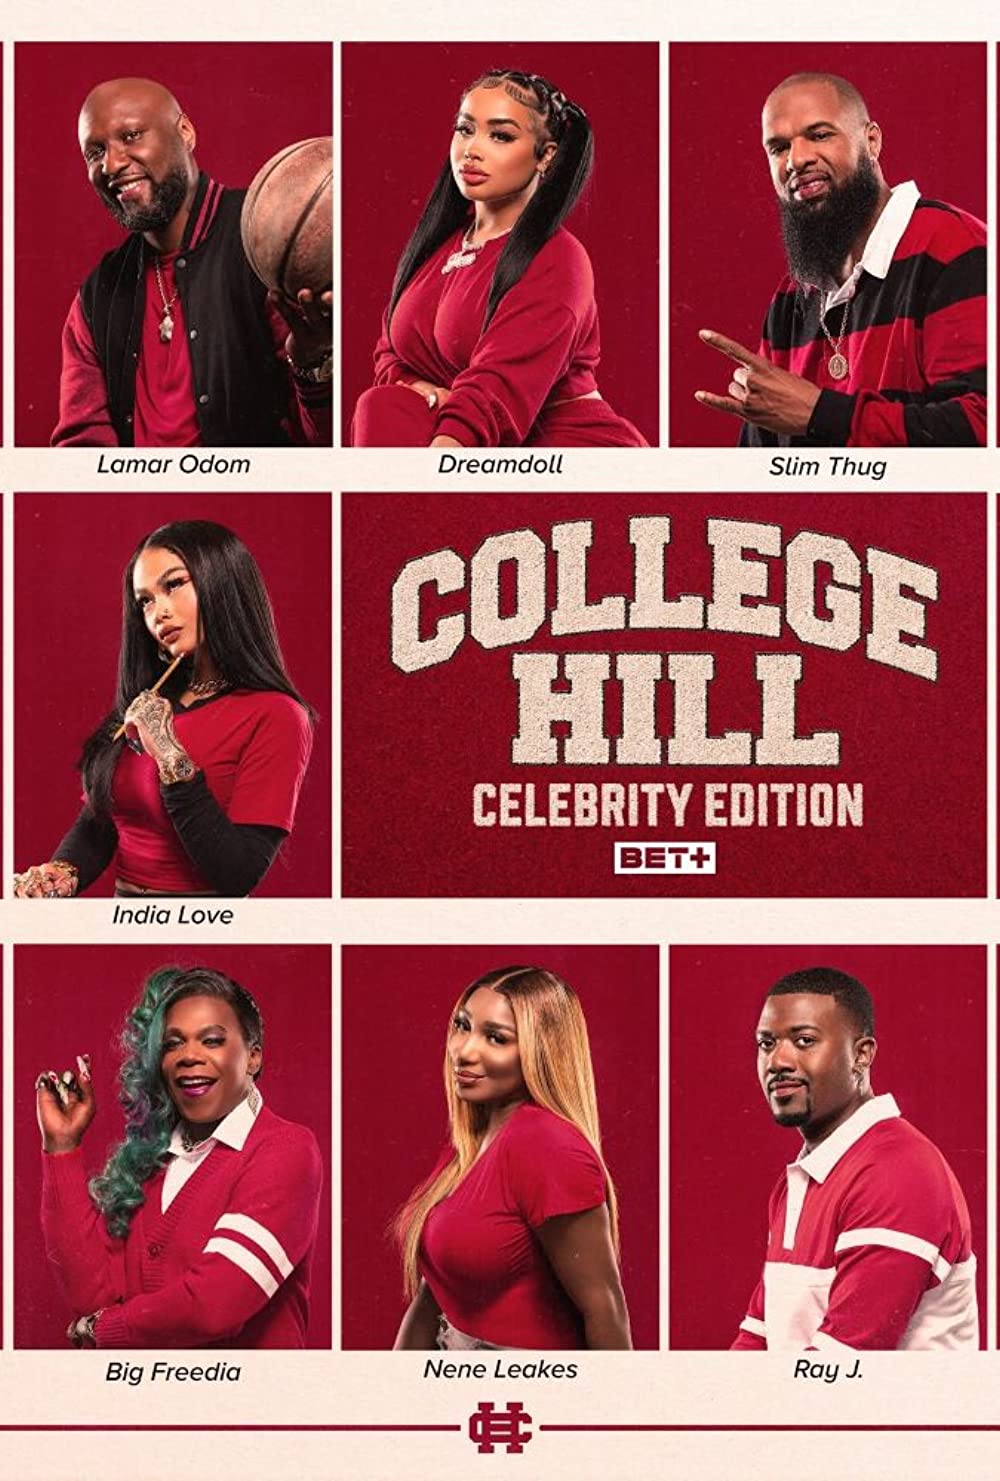 Download College Hill Celebrity Edition font